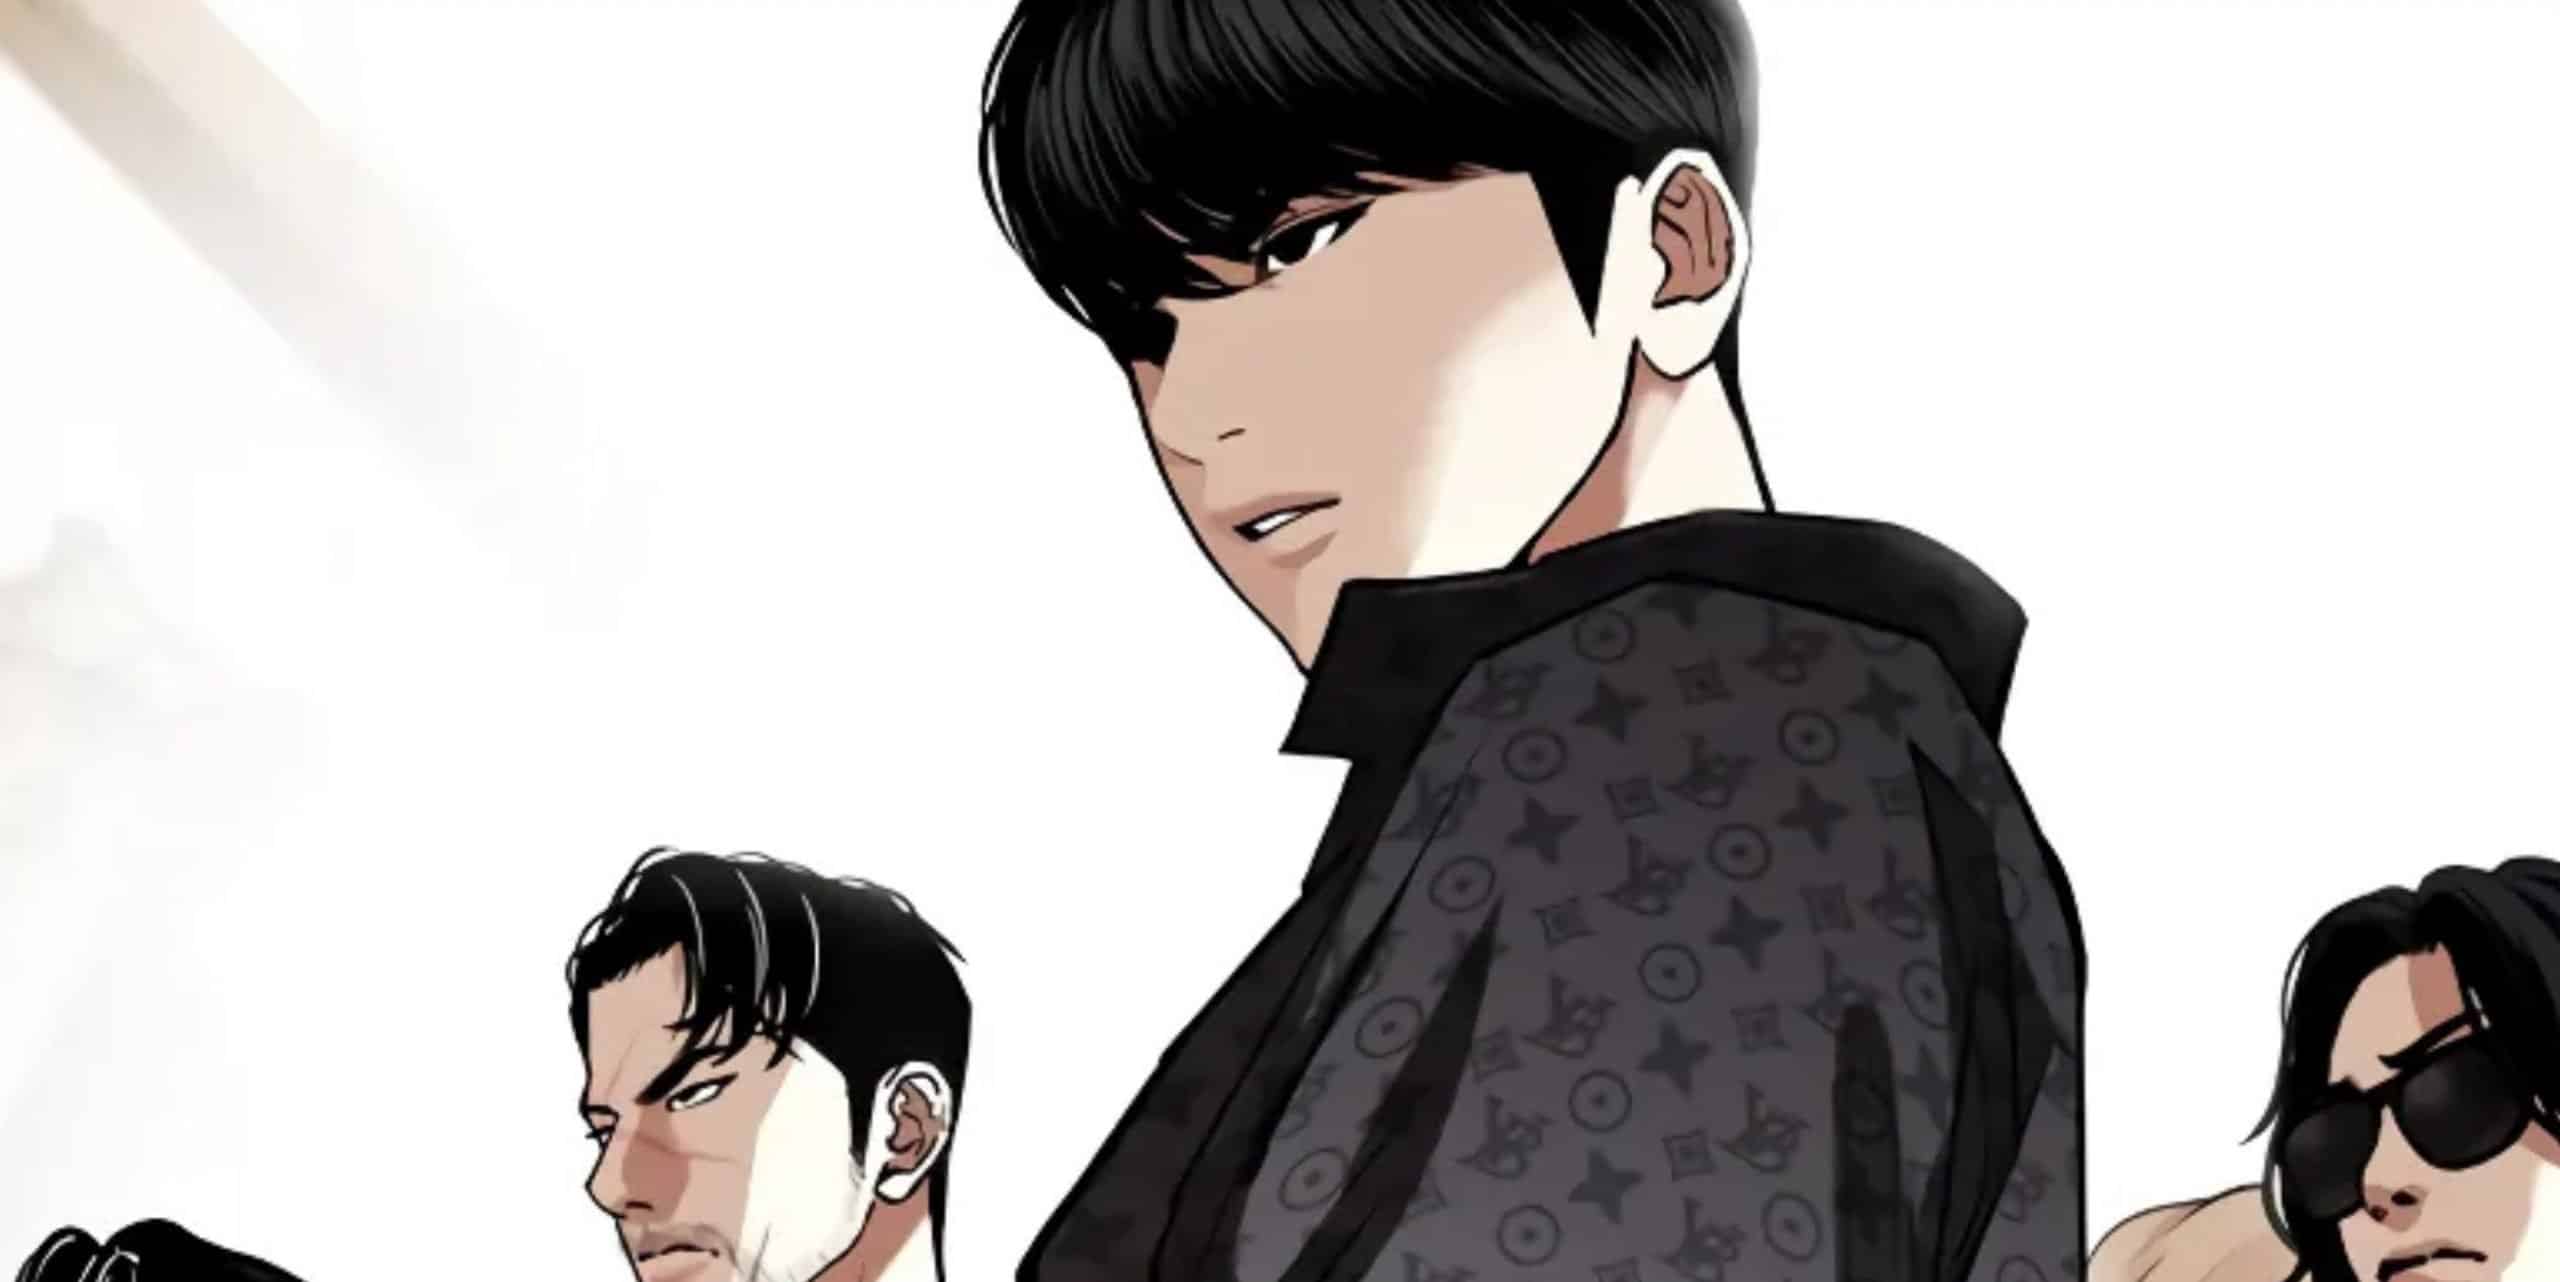 Lookism Chapter 456 release date